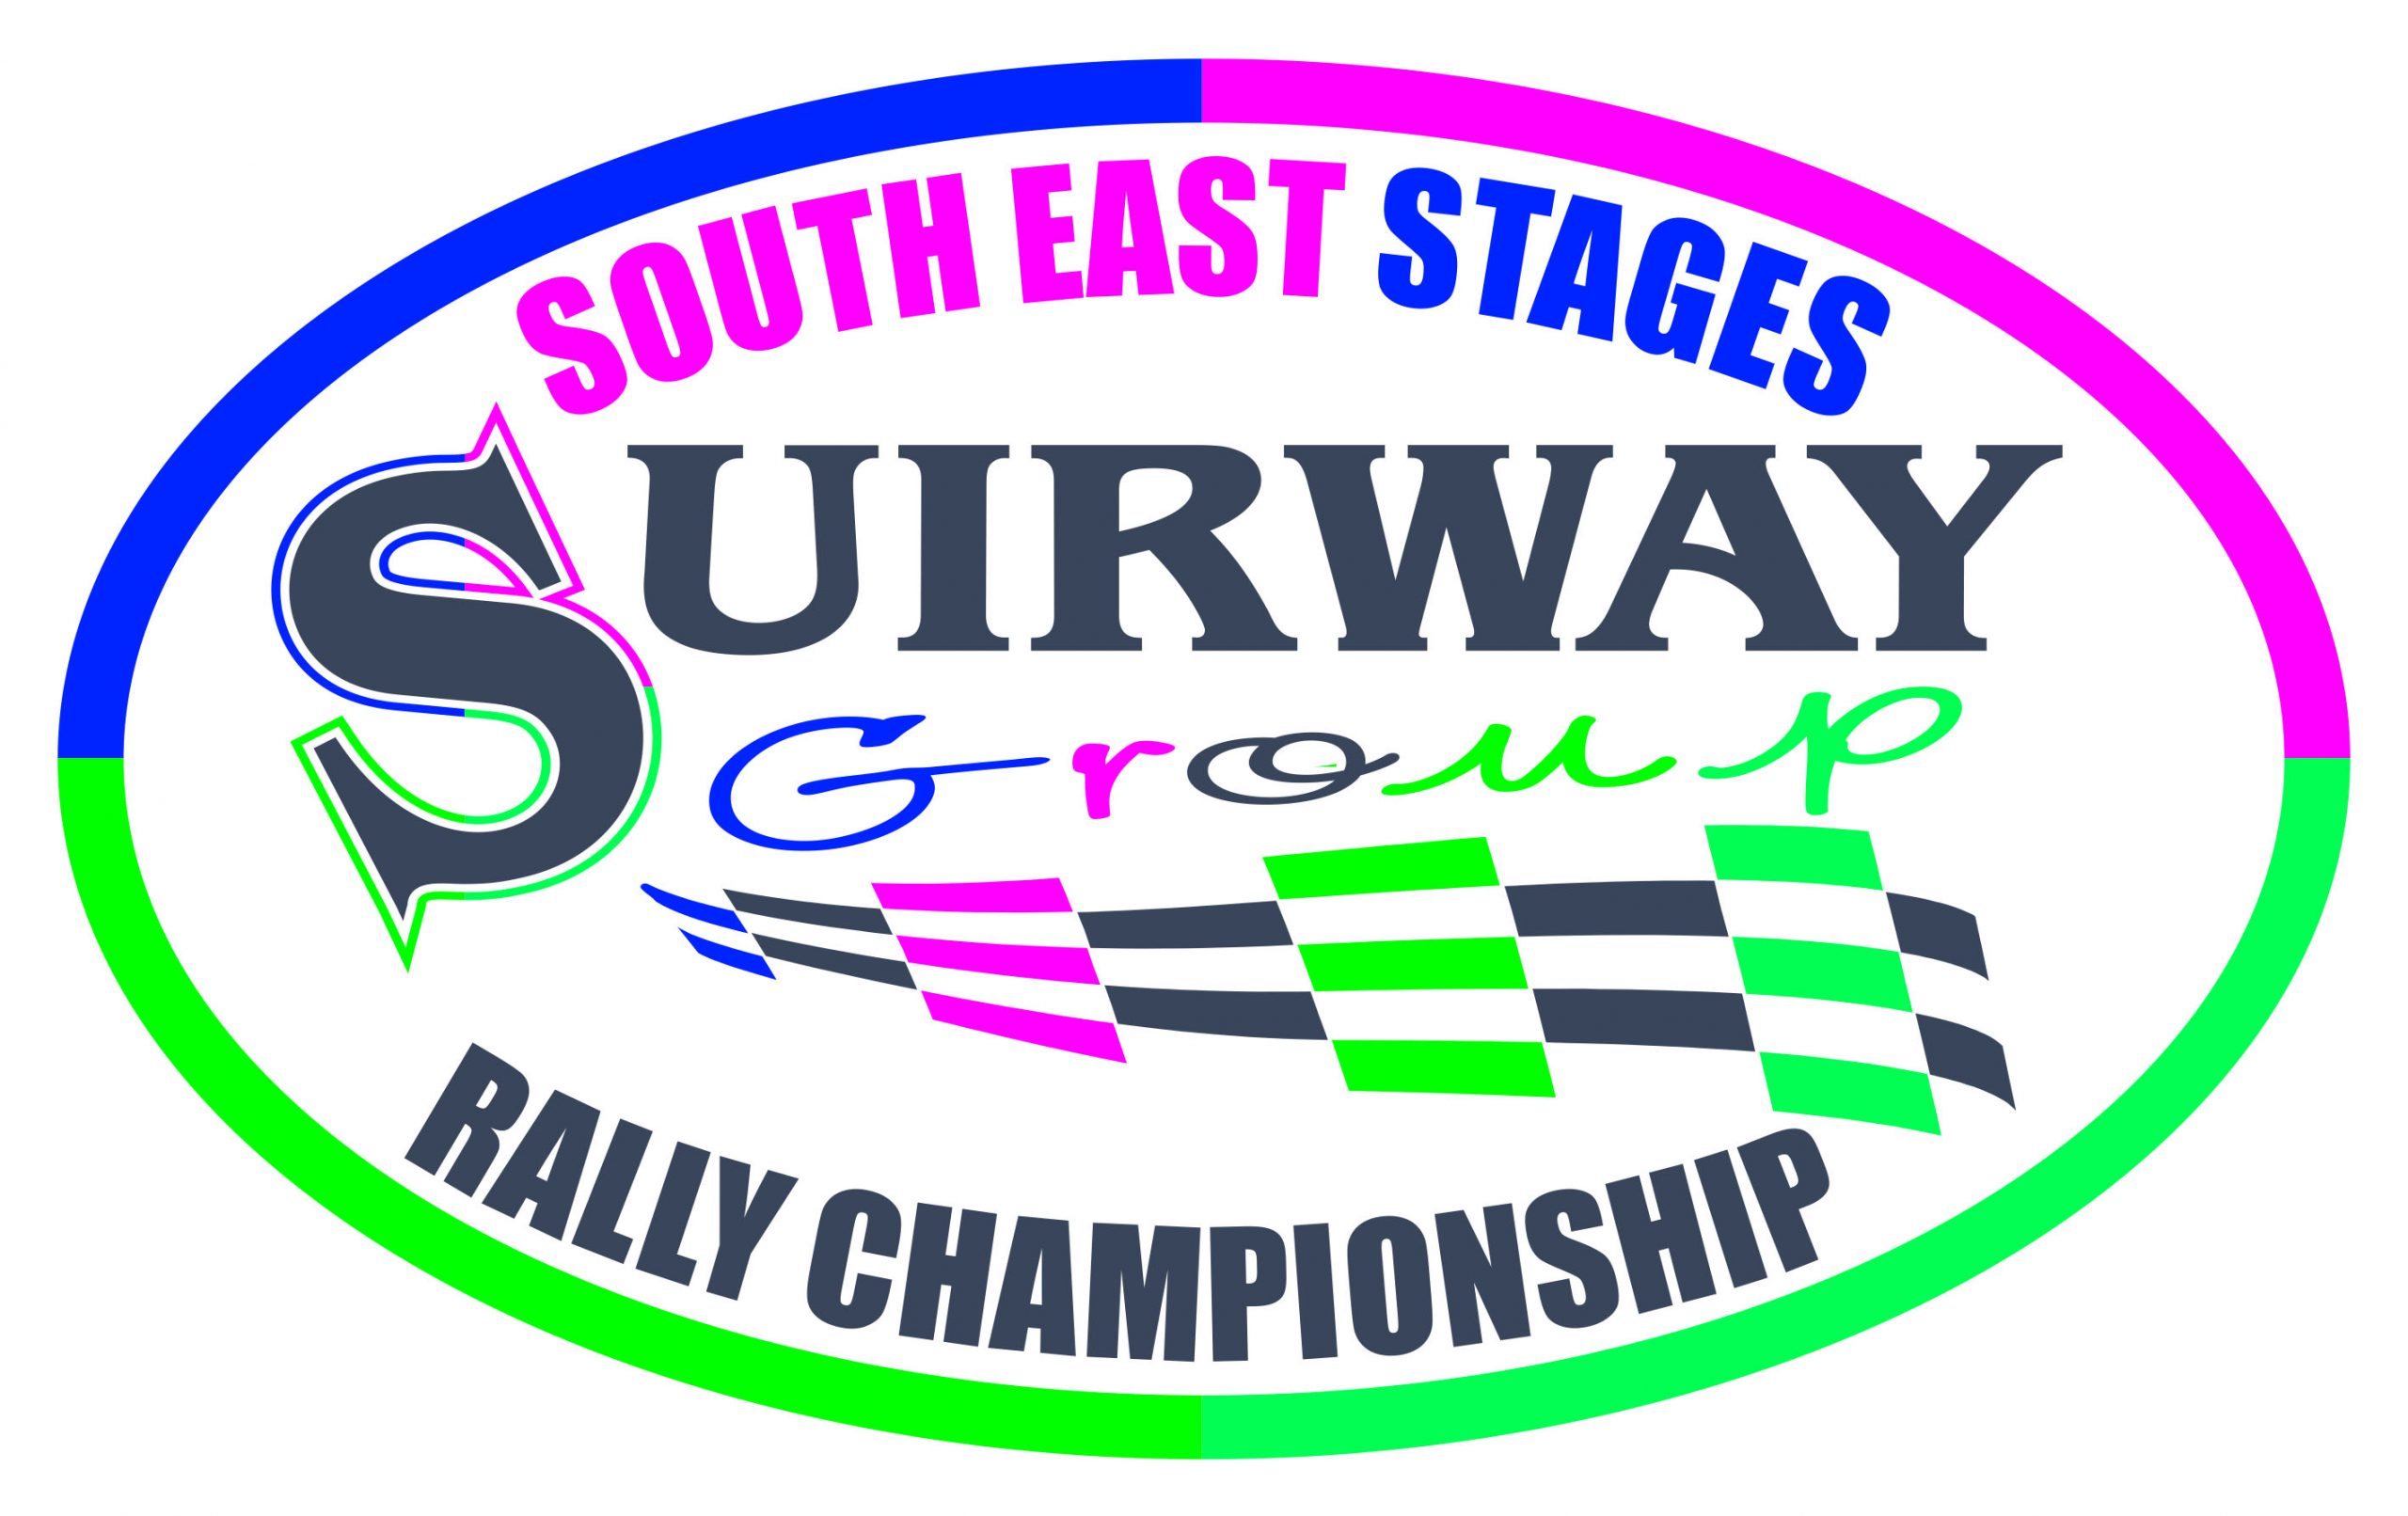 Provisional Points after Round 3 of the Suirway Group South East Stages Rally Championship